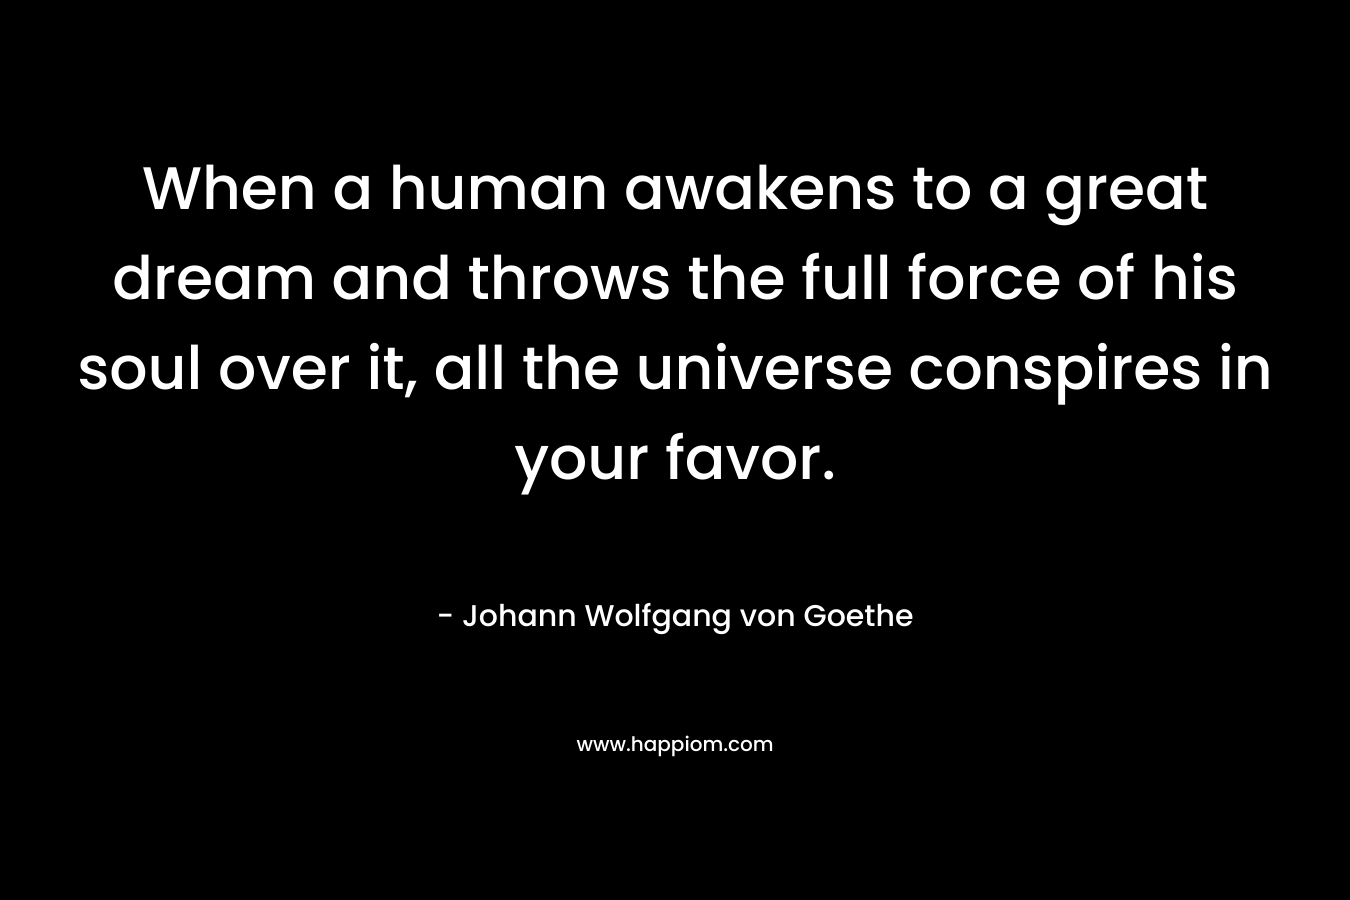 When a human awakens to a great dream and throws the full force of his soul over it, all the universe conspires in your favor. – Johann Wolfgang von Goethe